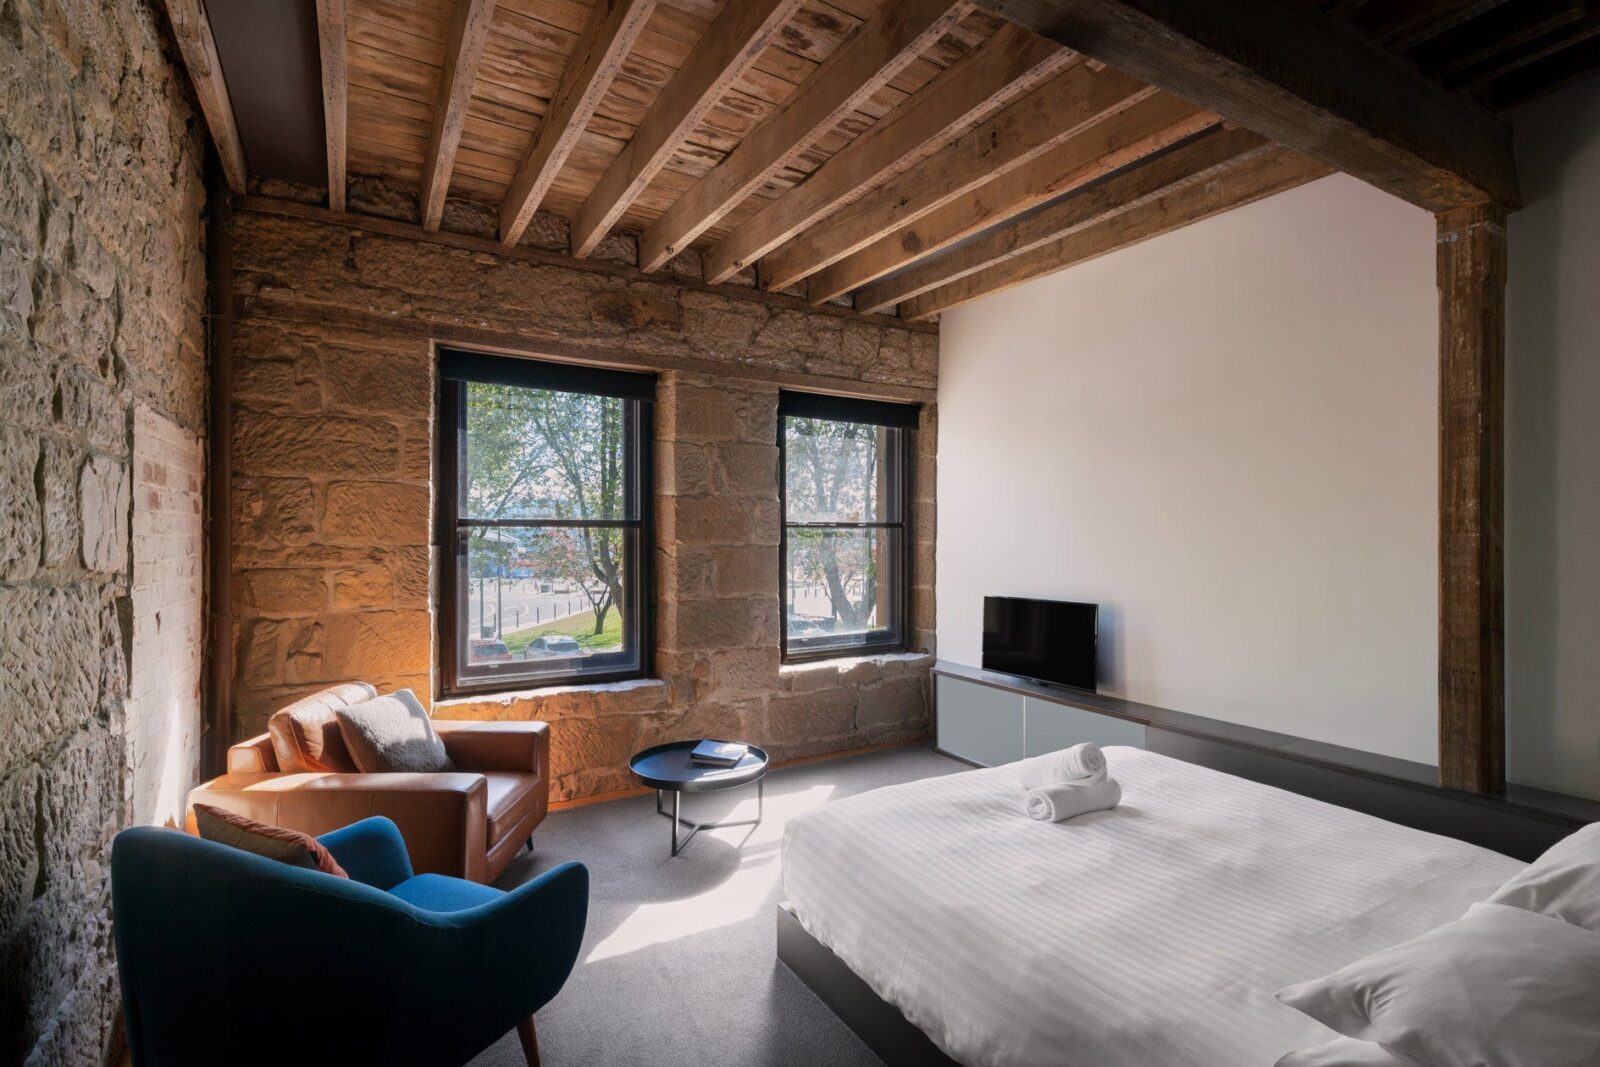 Bricked-over escape passage, sandstone walls, exposed beams, armchairs, king size bed, TV